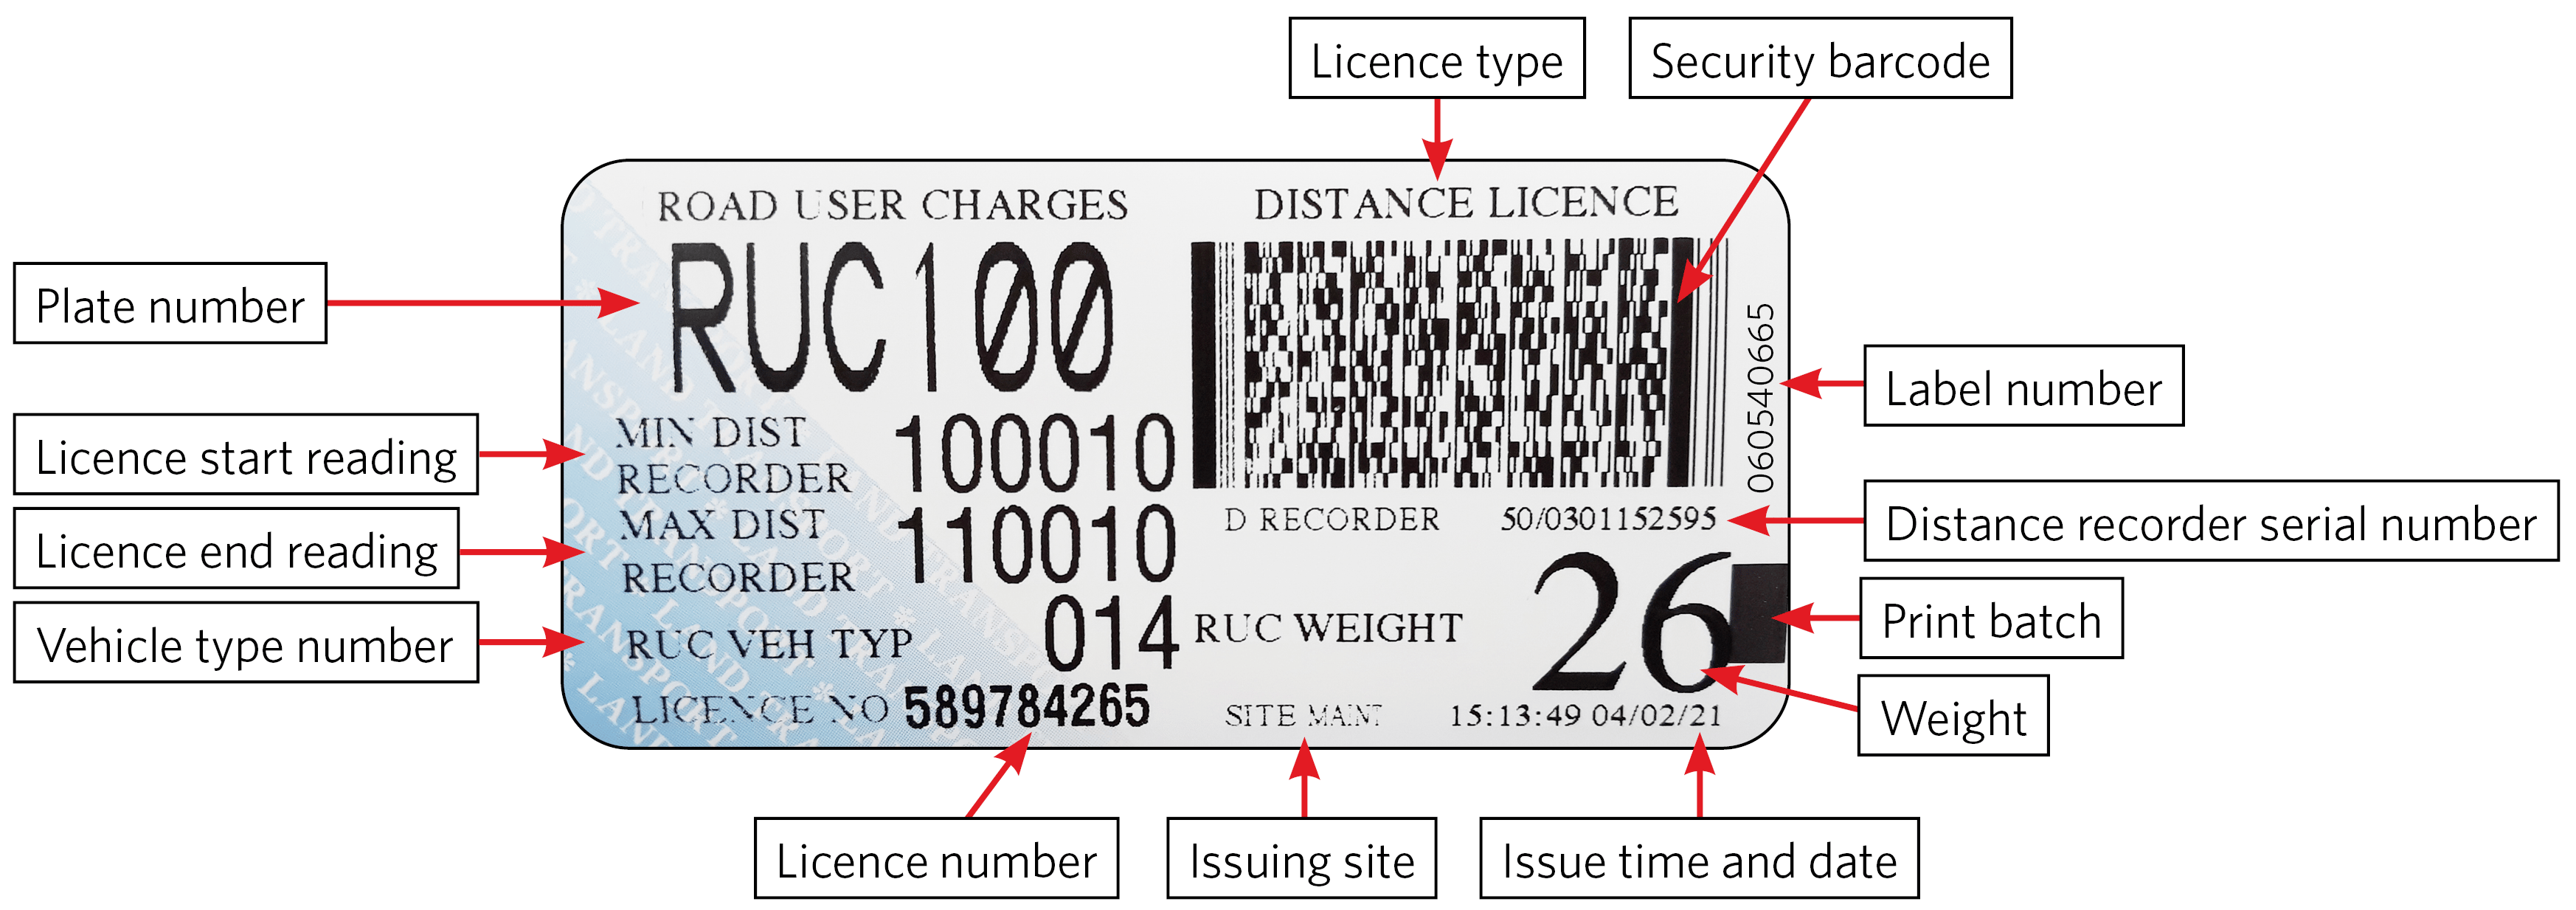 Example of a road user charge distance licence label